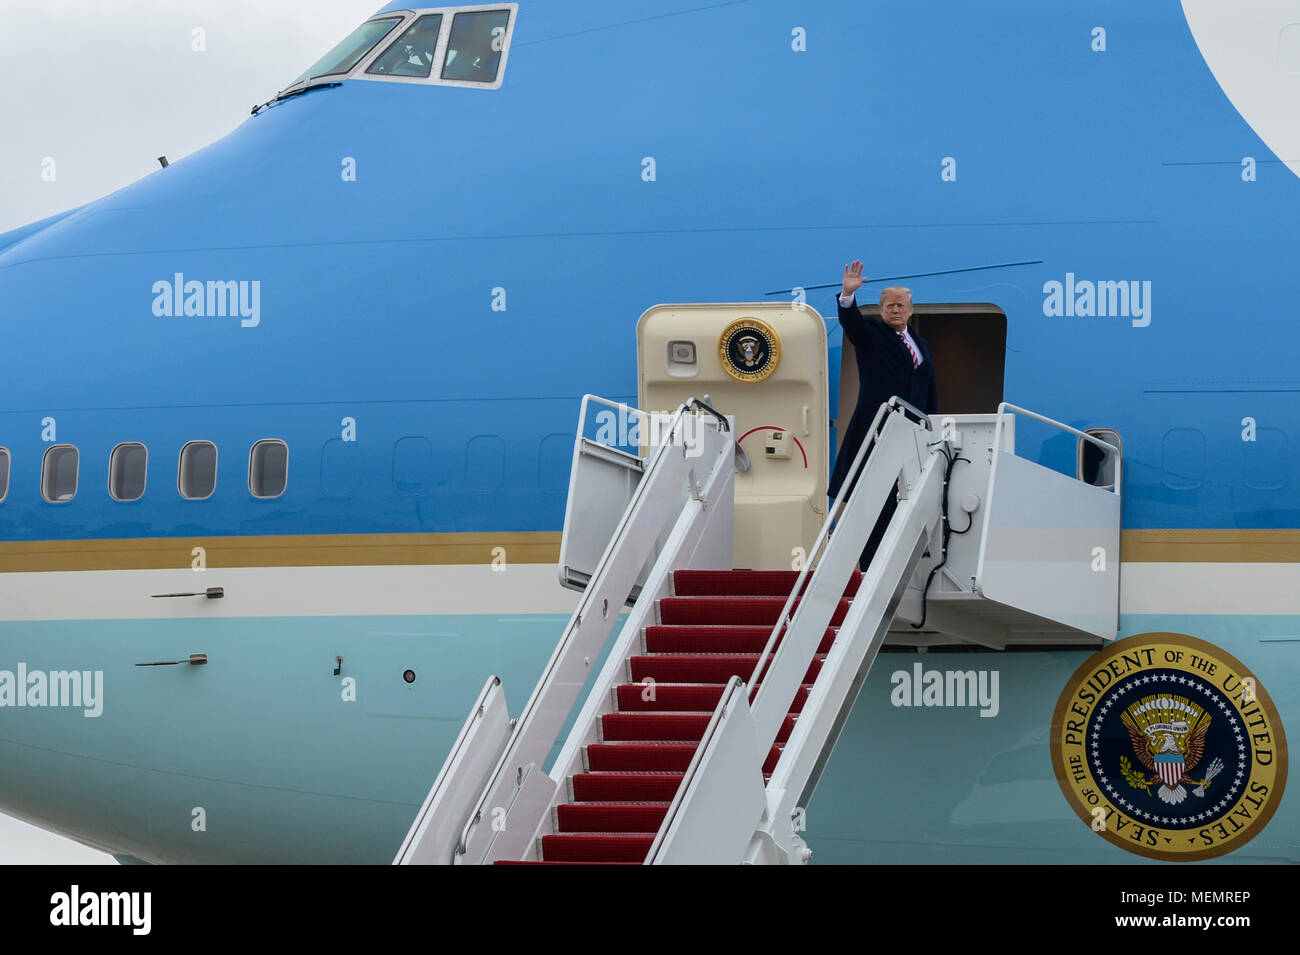 President of the United States Donald J. Trump waves to service members and guests gathered near the 89th Airlift Wing Passenger Terminal as he boards Air Force One at Joint Base Andrews, Md., April 16, 2018. The president went on to board Air Force One in route to West Palm Beach, Fla. The 89th AW provides global Special Air Mission airlift, logistics, aerial port and communications for the president, vice president, cabinet members, combatant commanders and other senior military and elected leaders as tasked by the White House, Air Force chief of staff and Air Mobility Command. (U.S. Air For Stock Photo